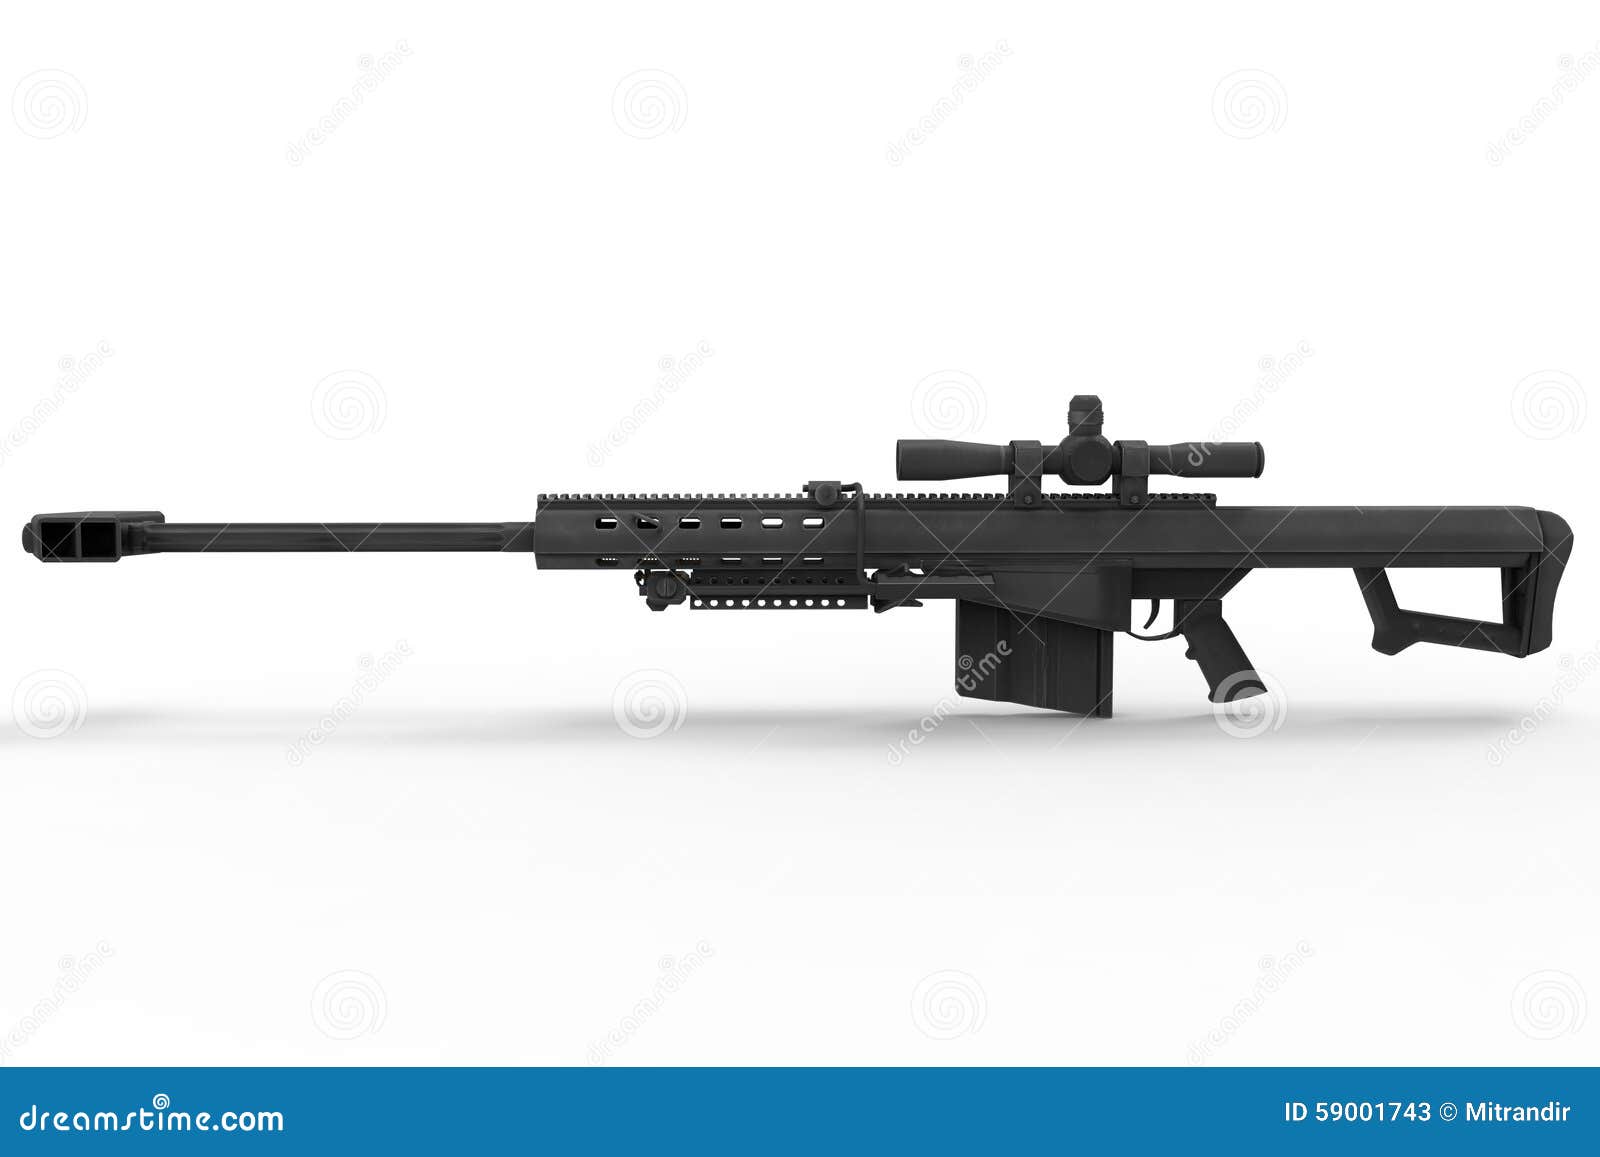 sniper rifle side view